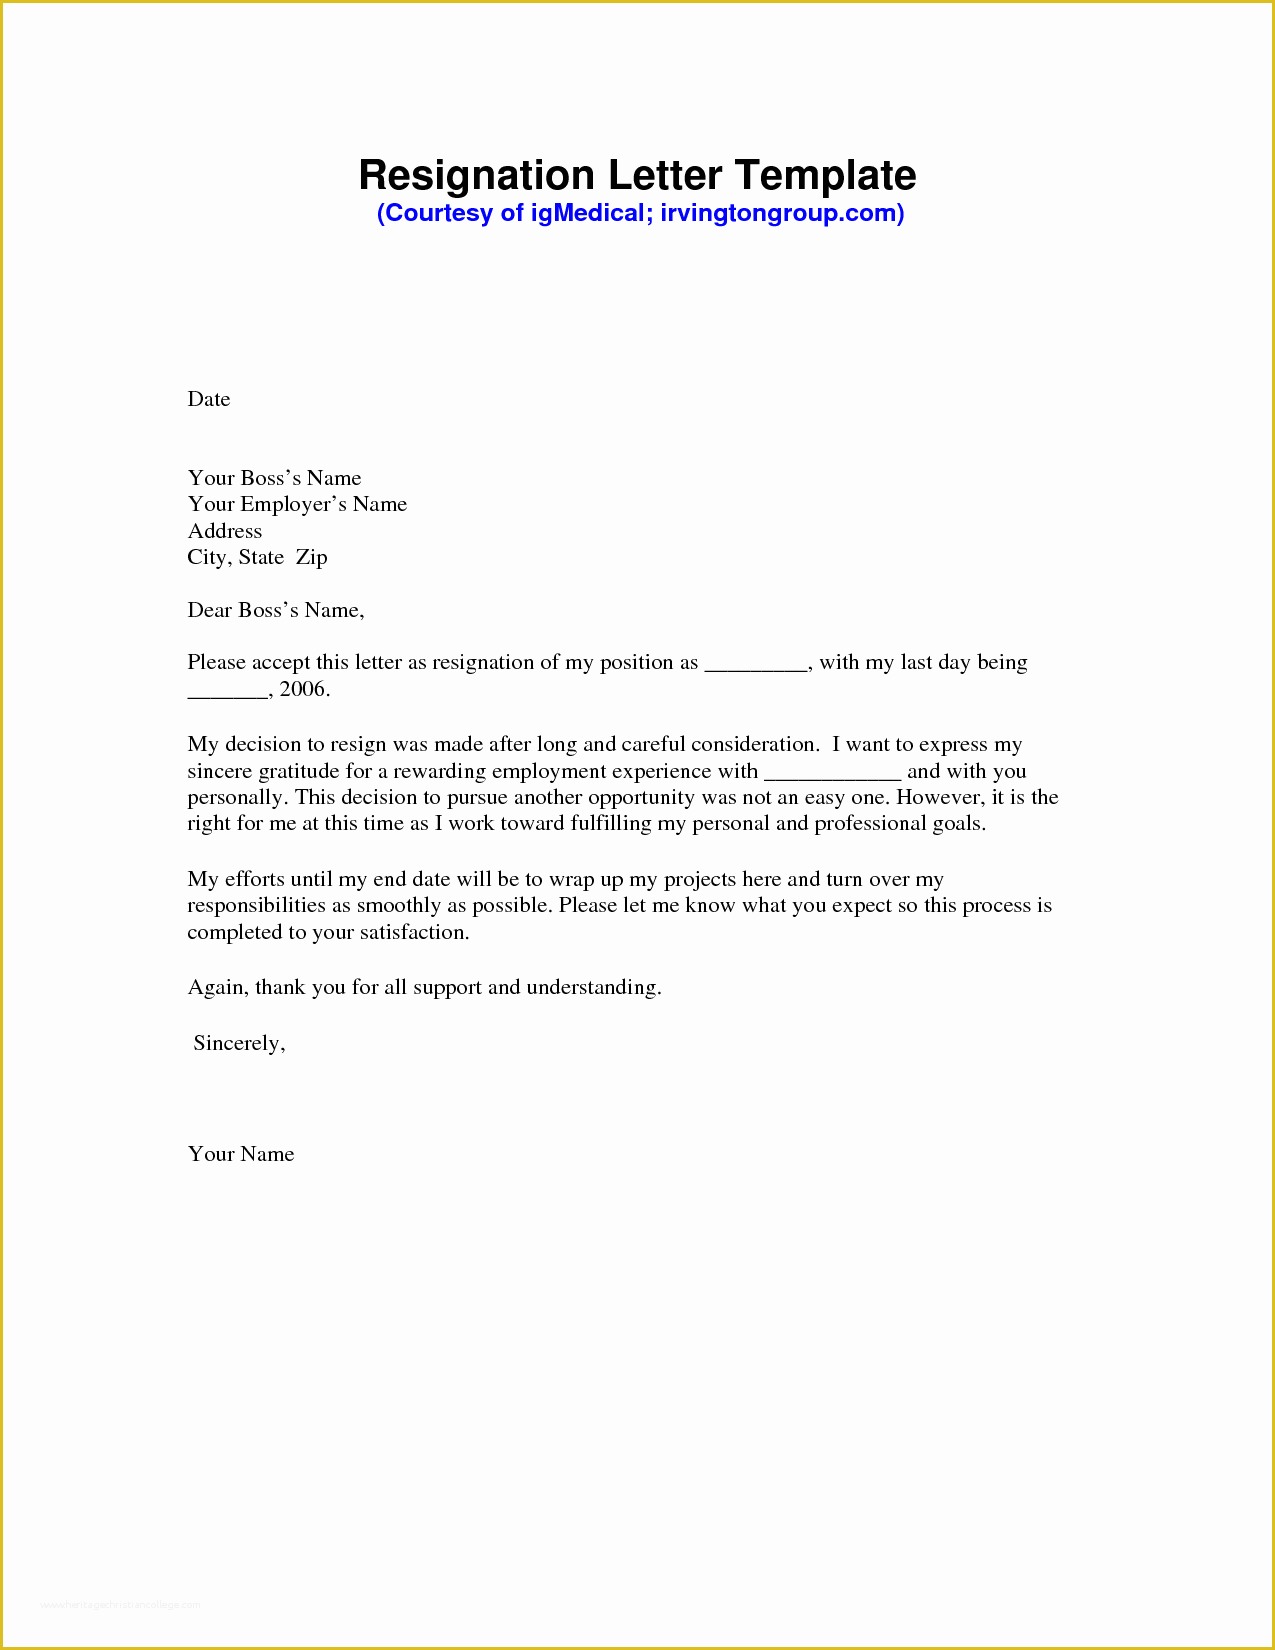 Resignation Letter Template Free Of Resignation Letter Template Free